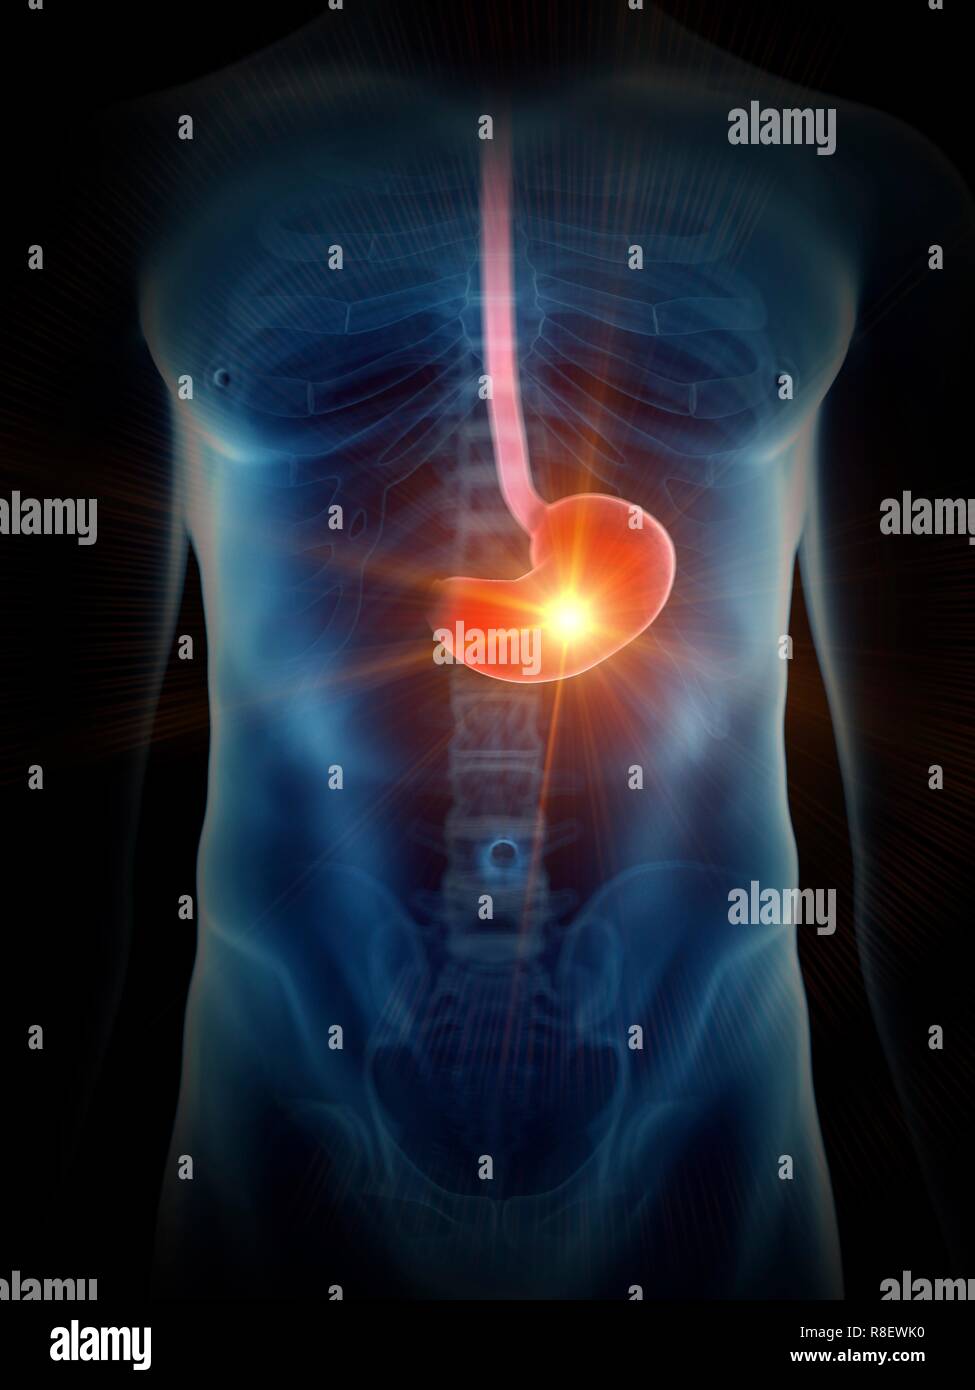 Illustration of a painful stomach. Stock Photo